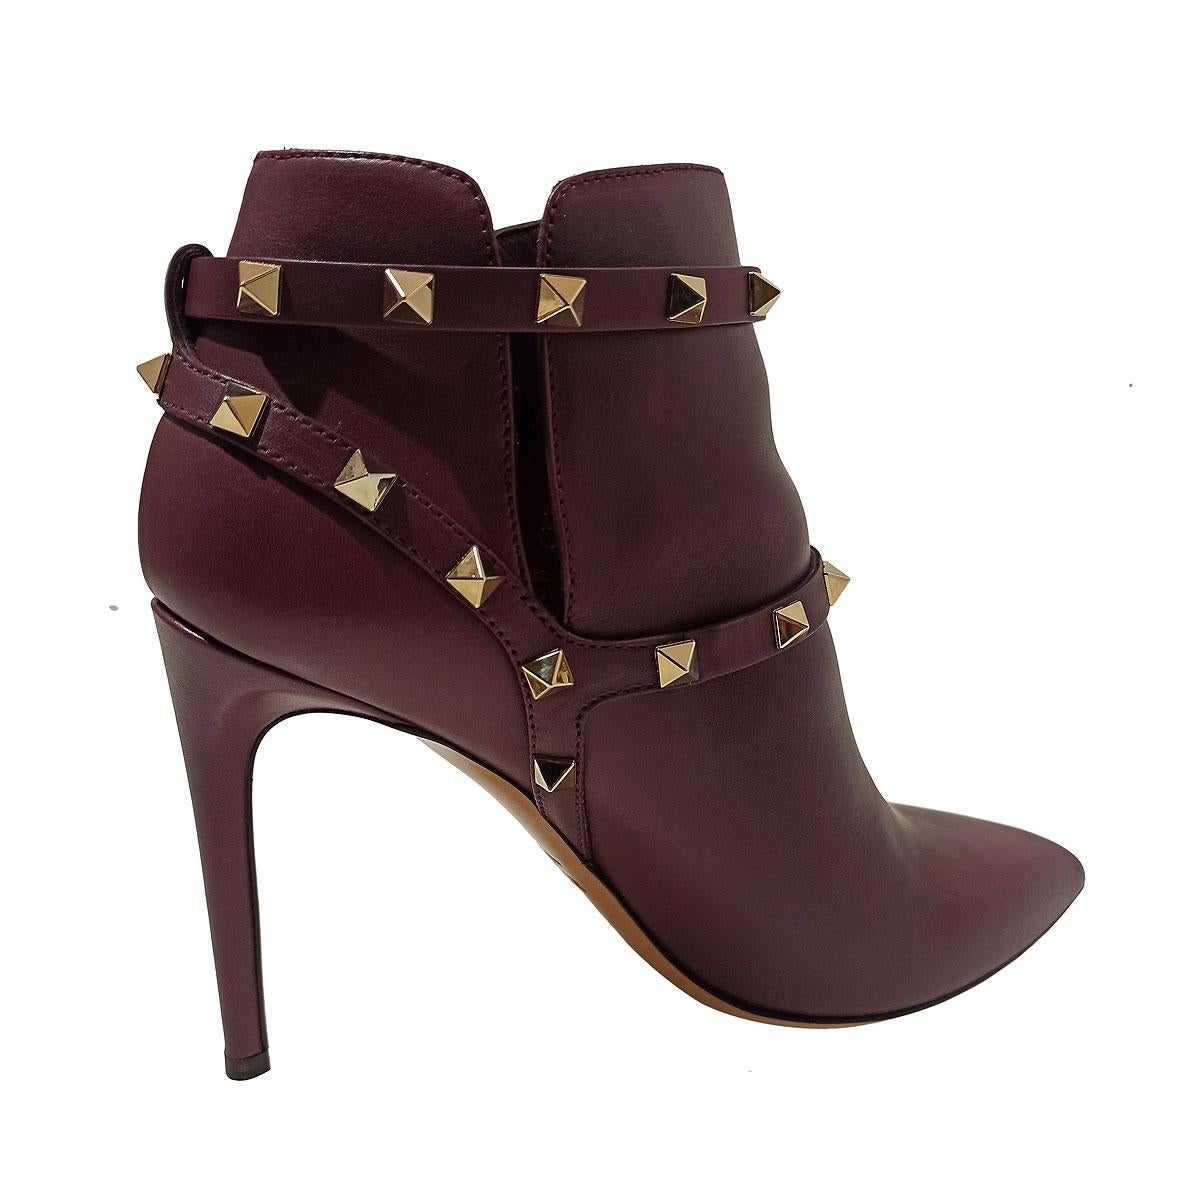 Iconic Valentino Garavani rockstud ankle boots
Leather
Ruby / bordeaux color
Metal studs
Double buckle
Heel height cm 10 (3.93 inches)
Original price € 890
Worldwide express shipping included in the price !